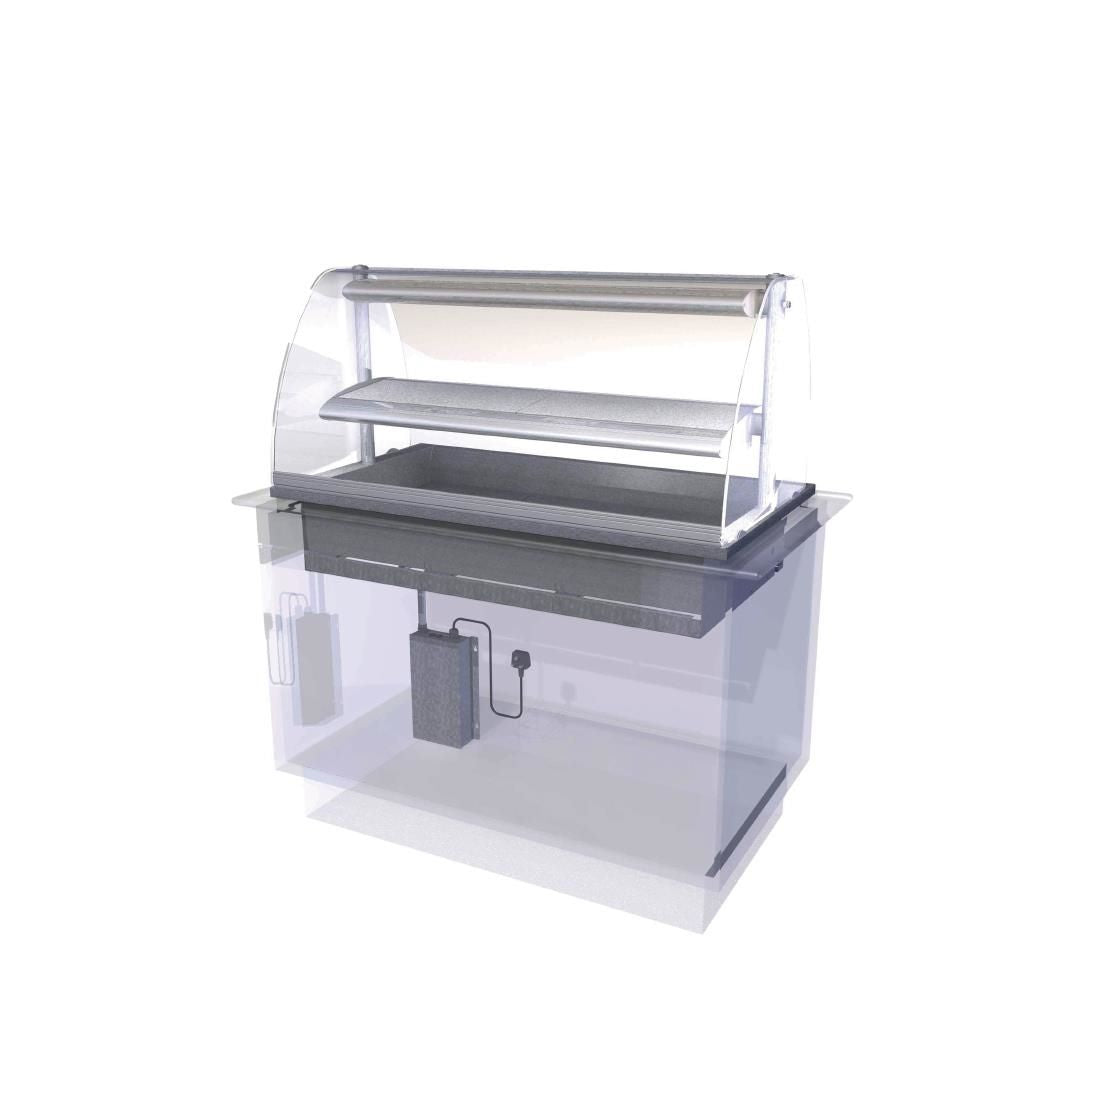 CW616 Designline Drop In Heated Serve Over Counter HDL3 JD Catering Equipment Solutions Ltd